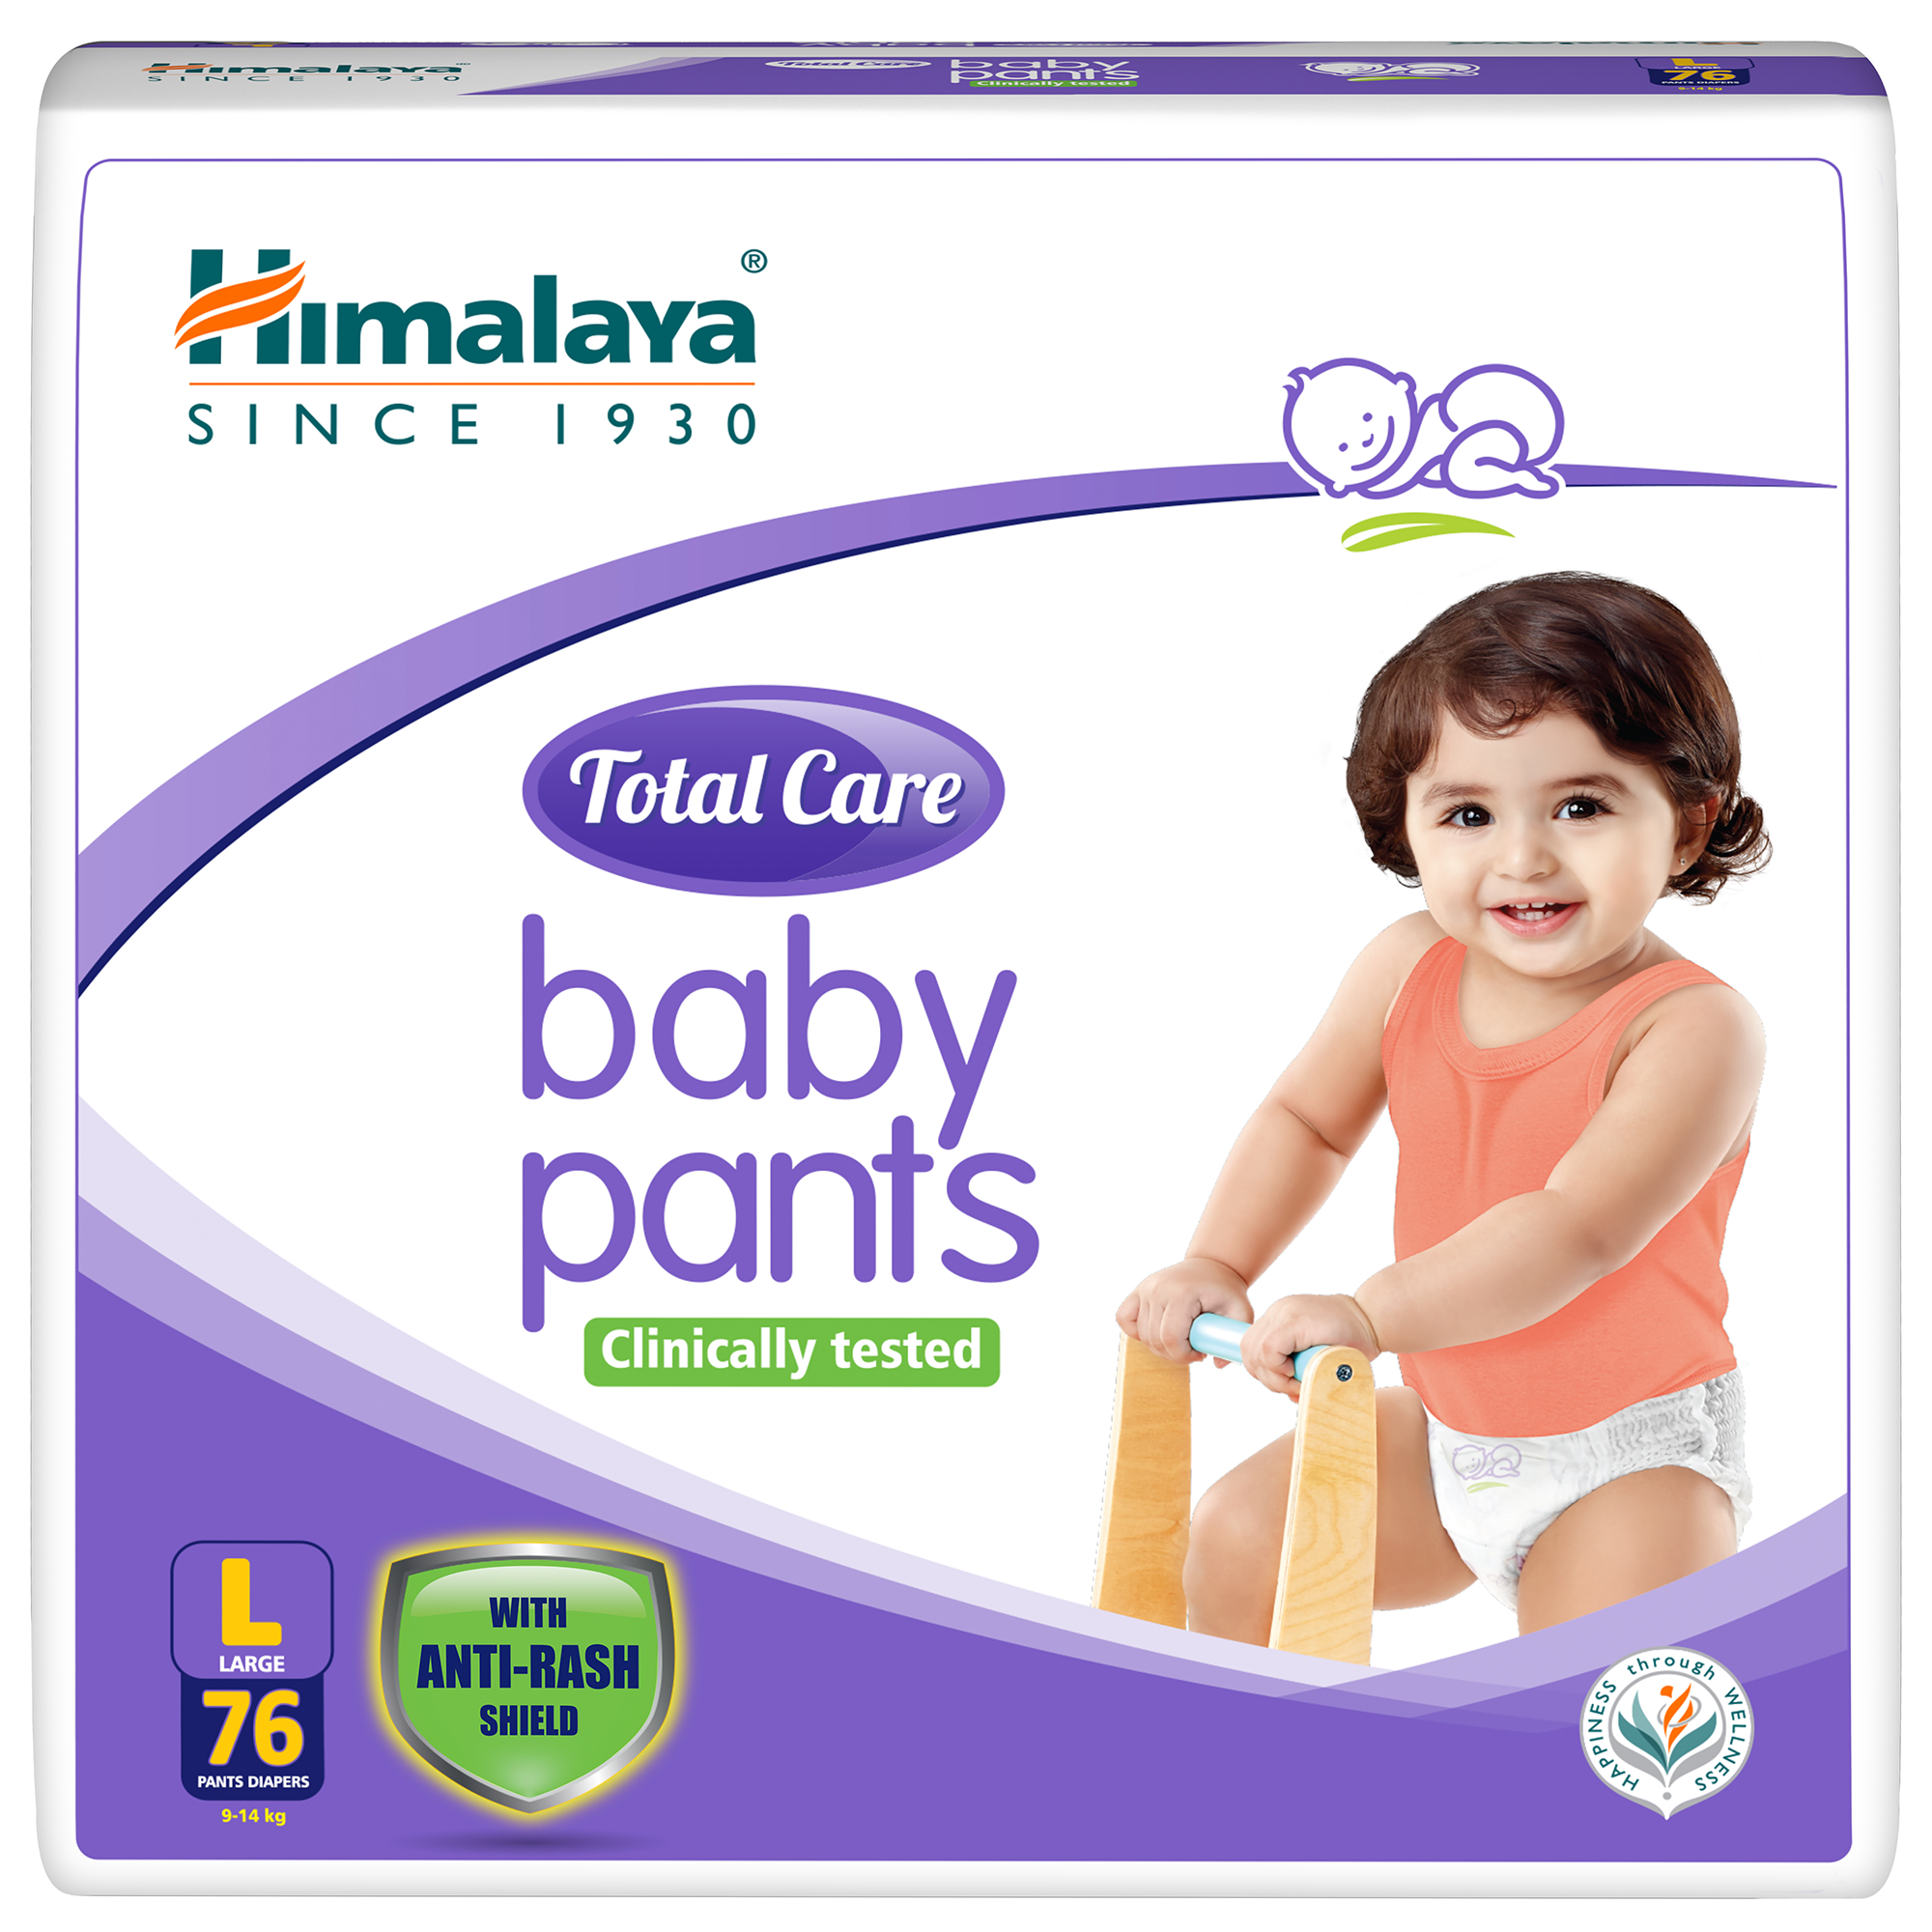 Himalaya Total Care Baby Pants  With AntiRash Shield  Wetness Indicator   Size Medium Buy packet of 54 diapers at best price in India  1mg